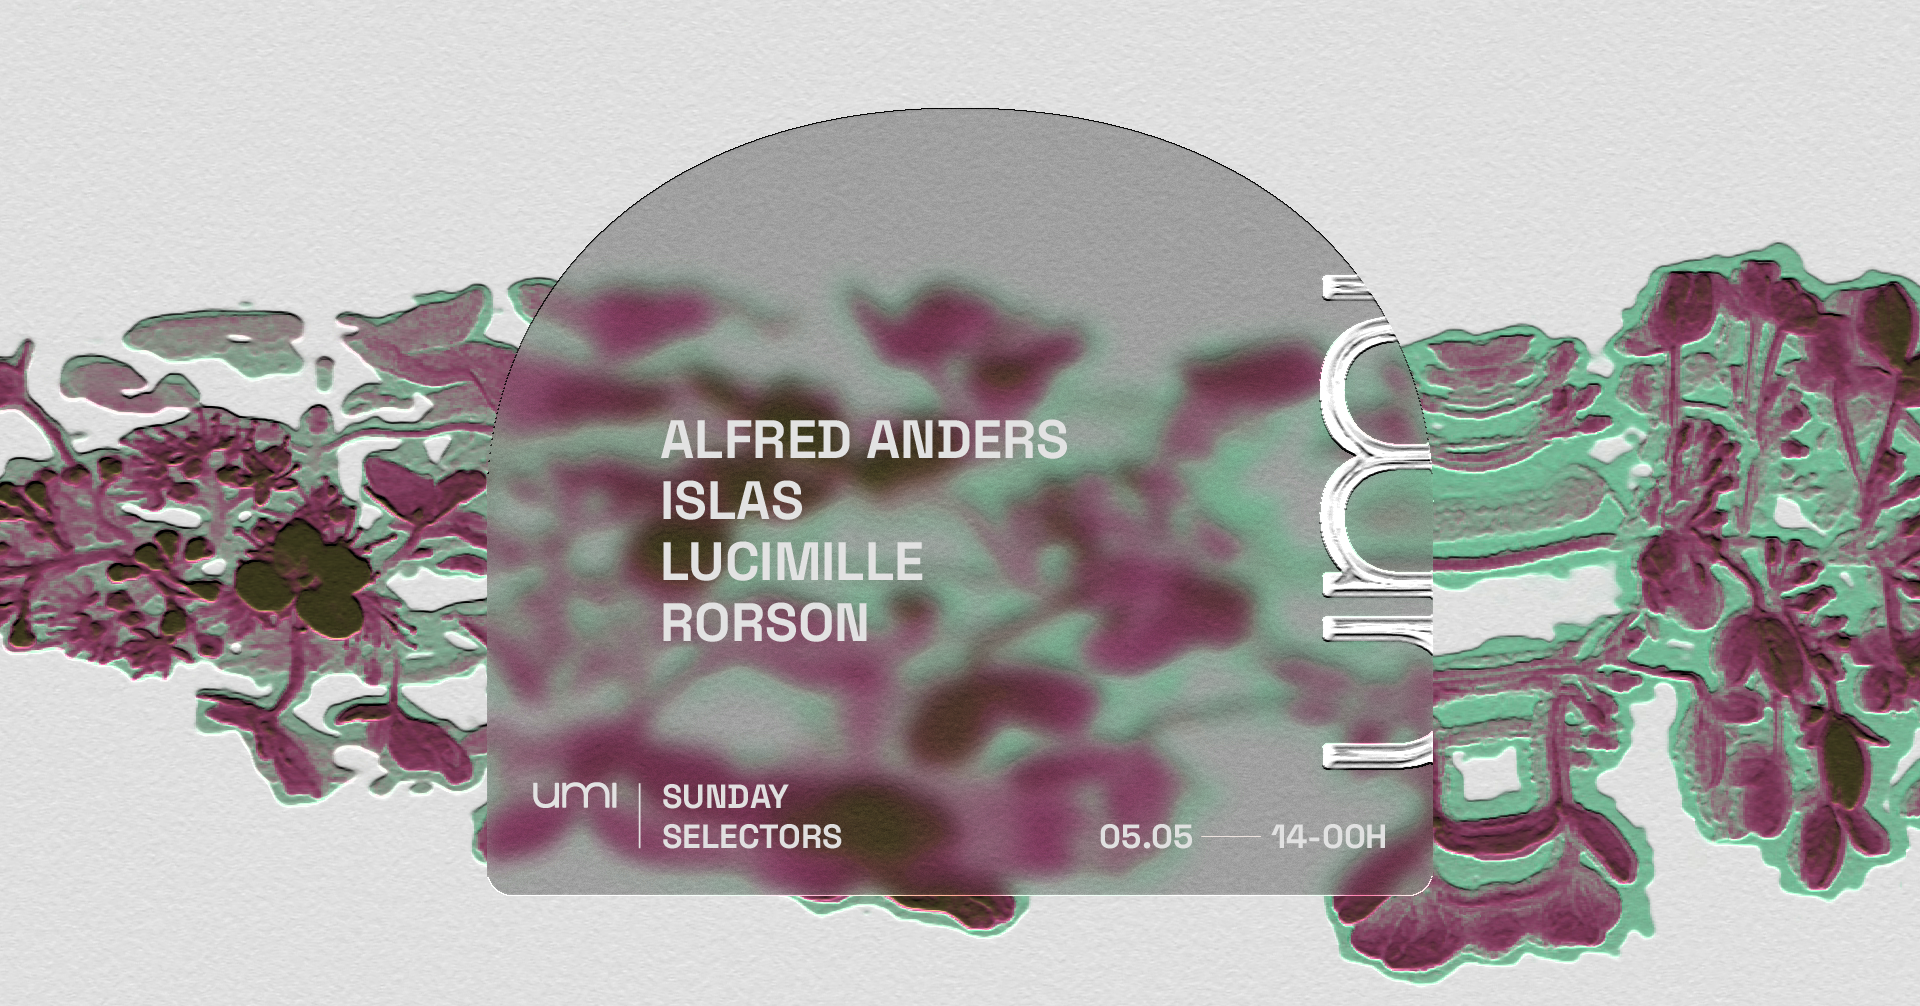 UMI SUNDAY SELECTORS with Alfred Anders, Islas, Lucimille, Rorson - Página frontal